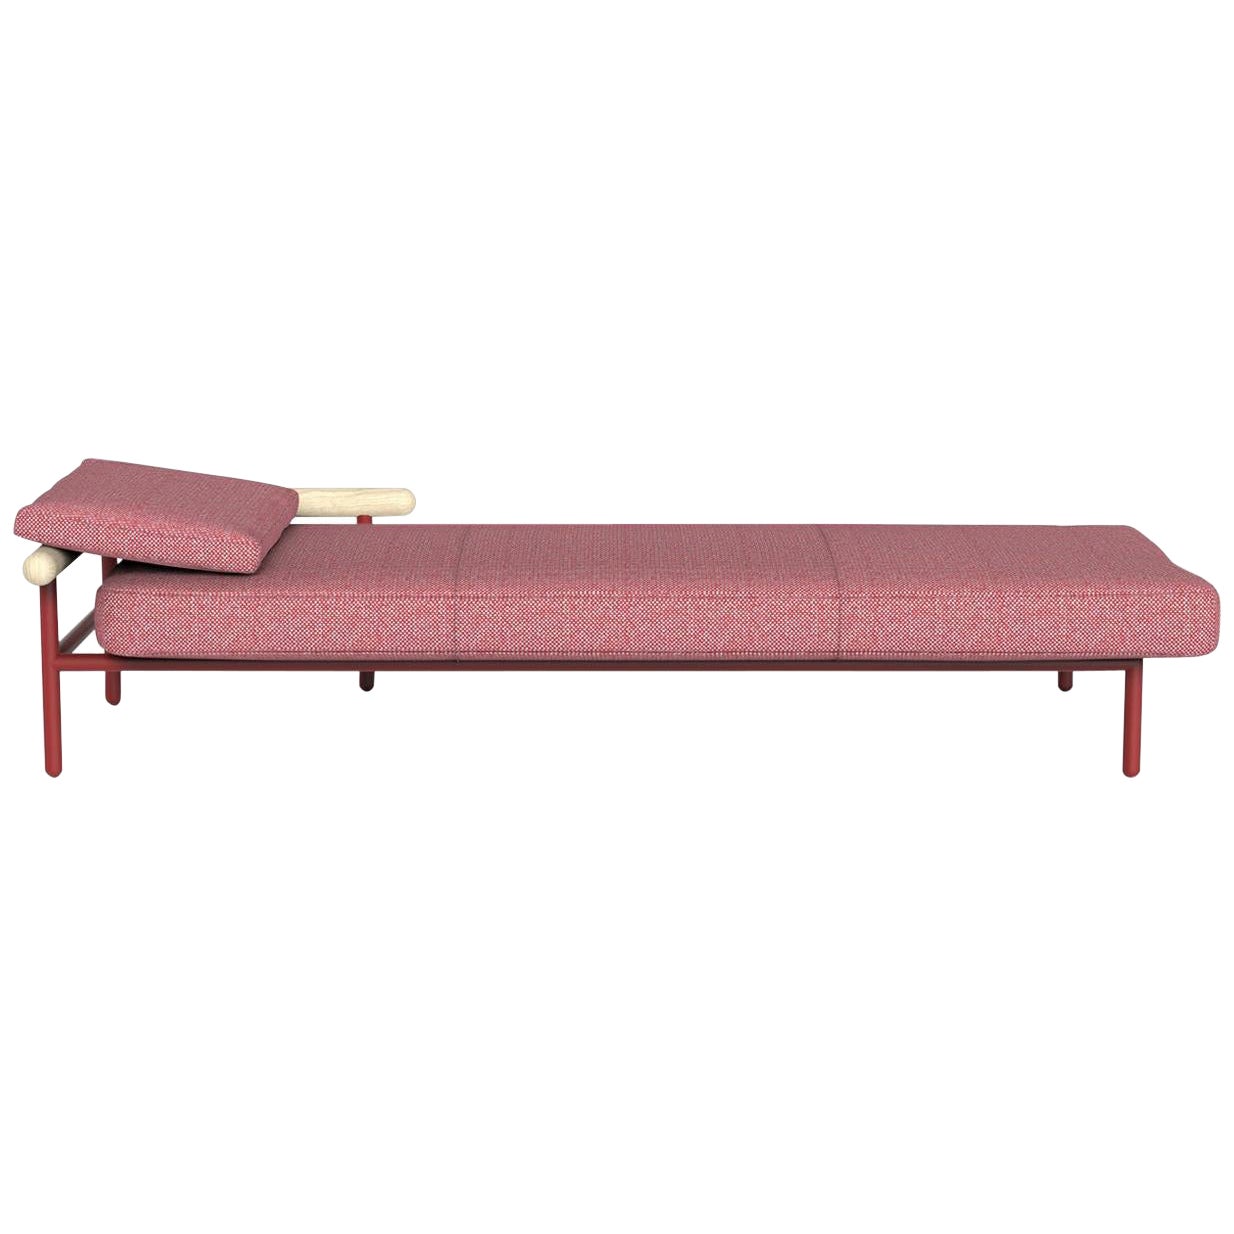 Upholstered "X-Rays" Daybed, Alain Gilles